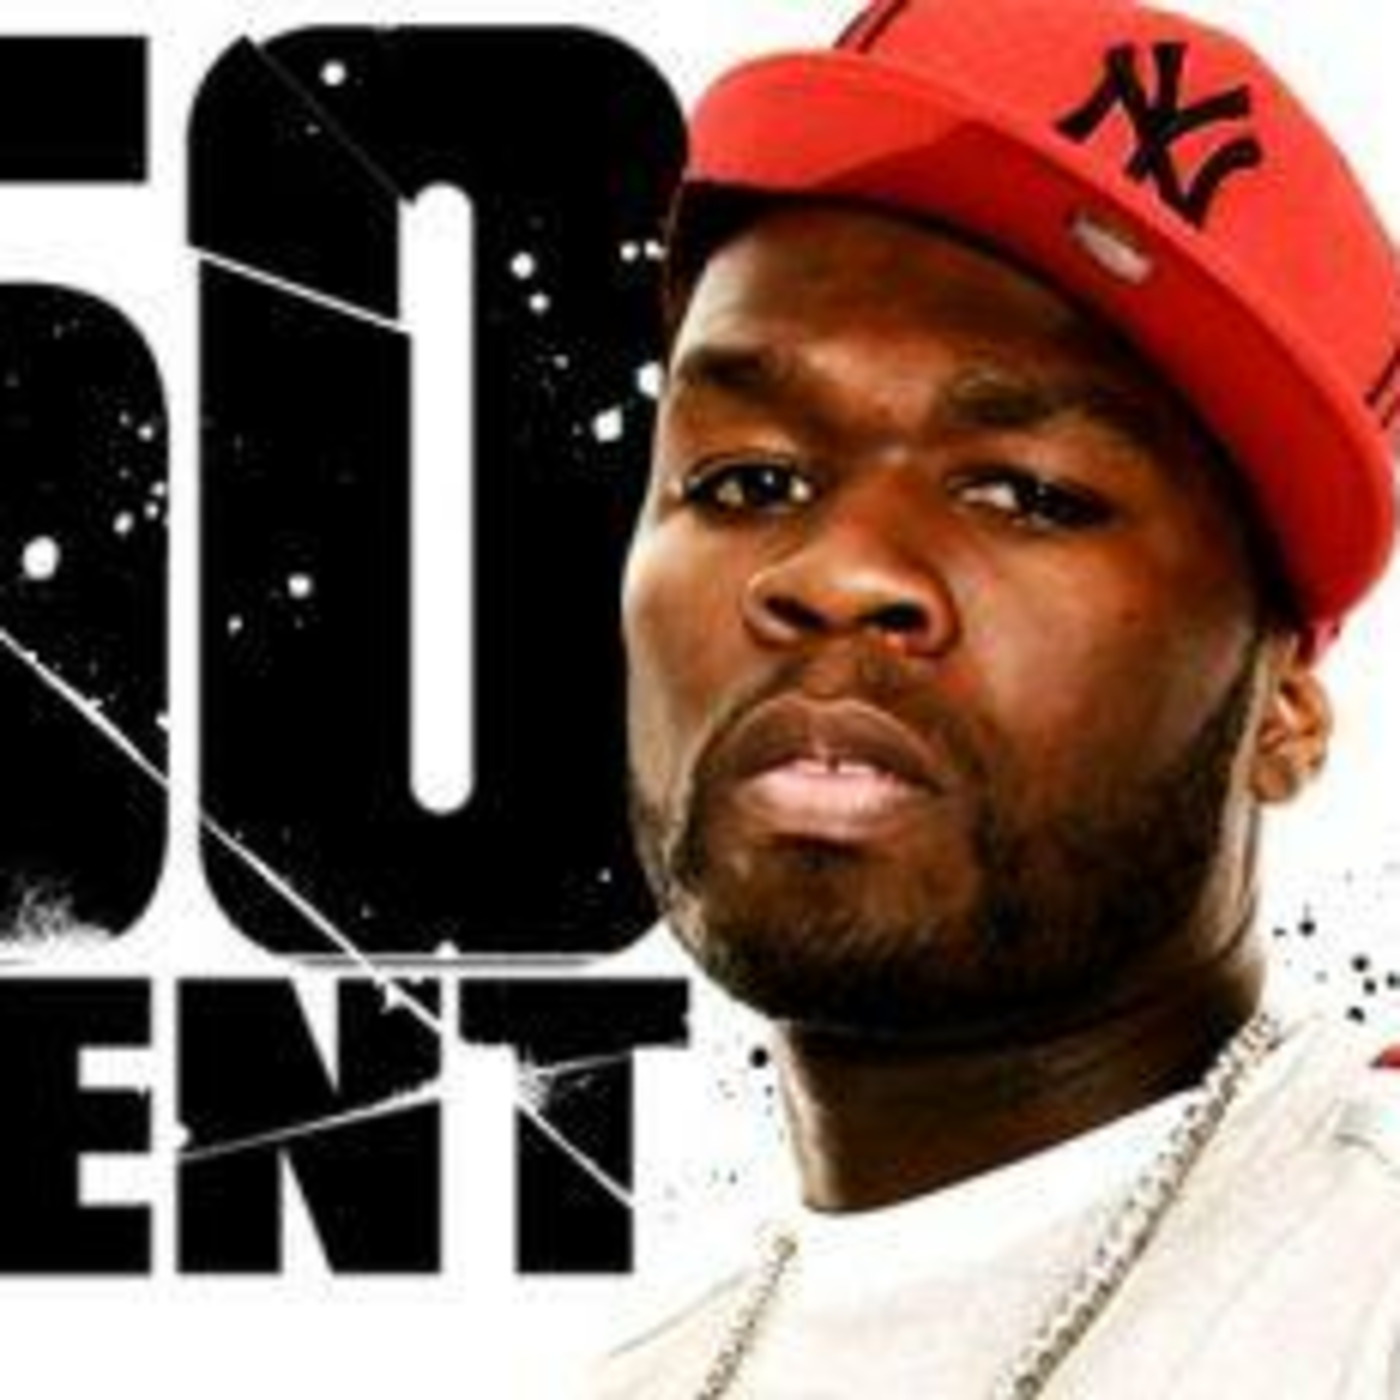 THE BEST OF 50 CENT